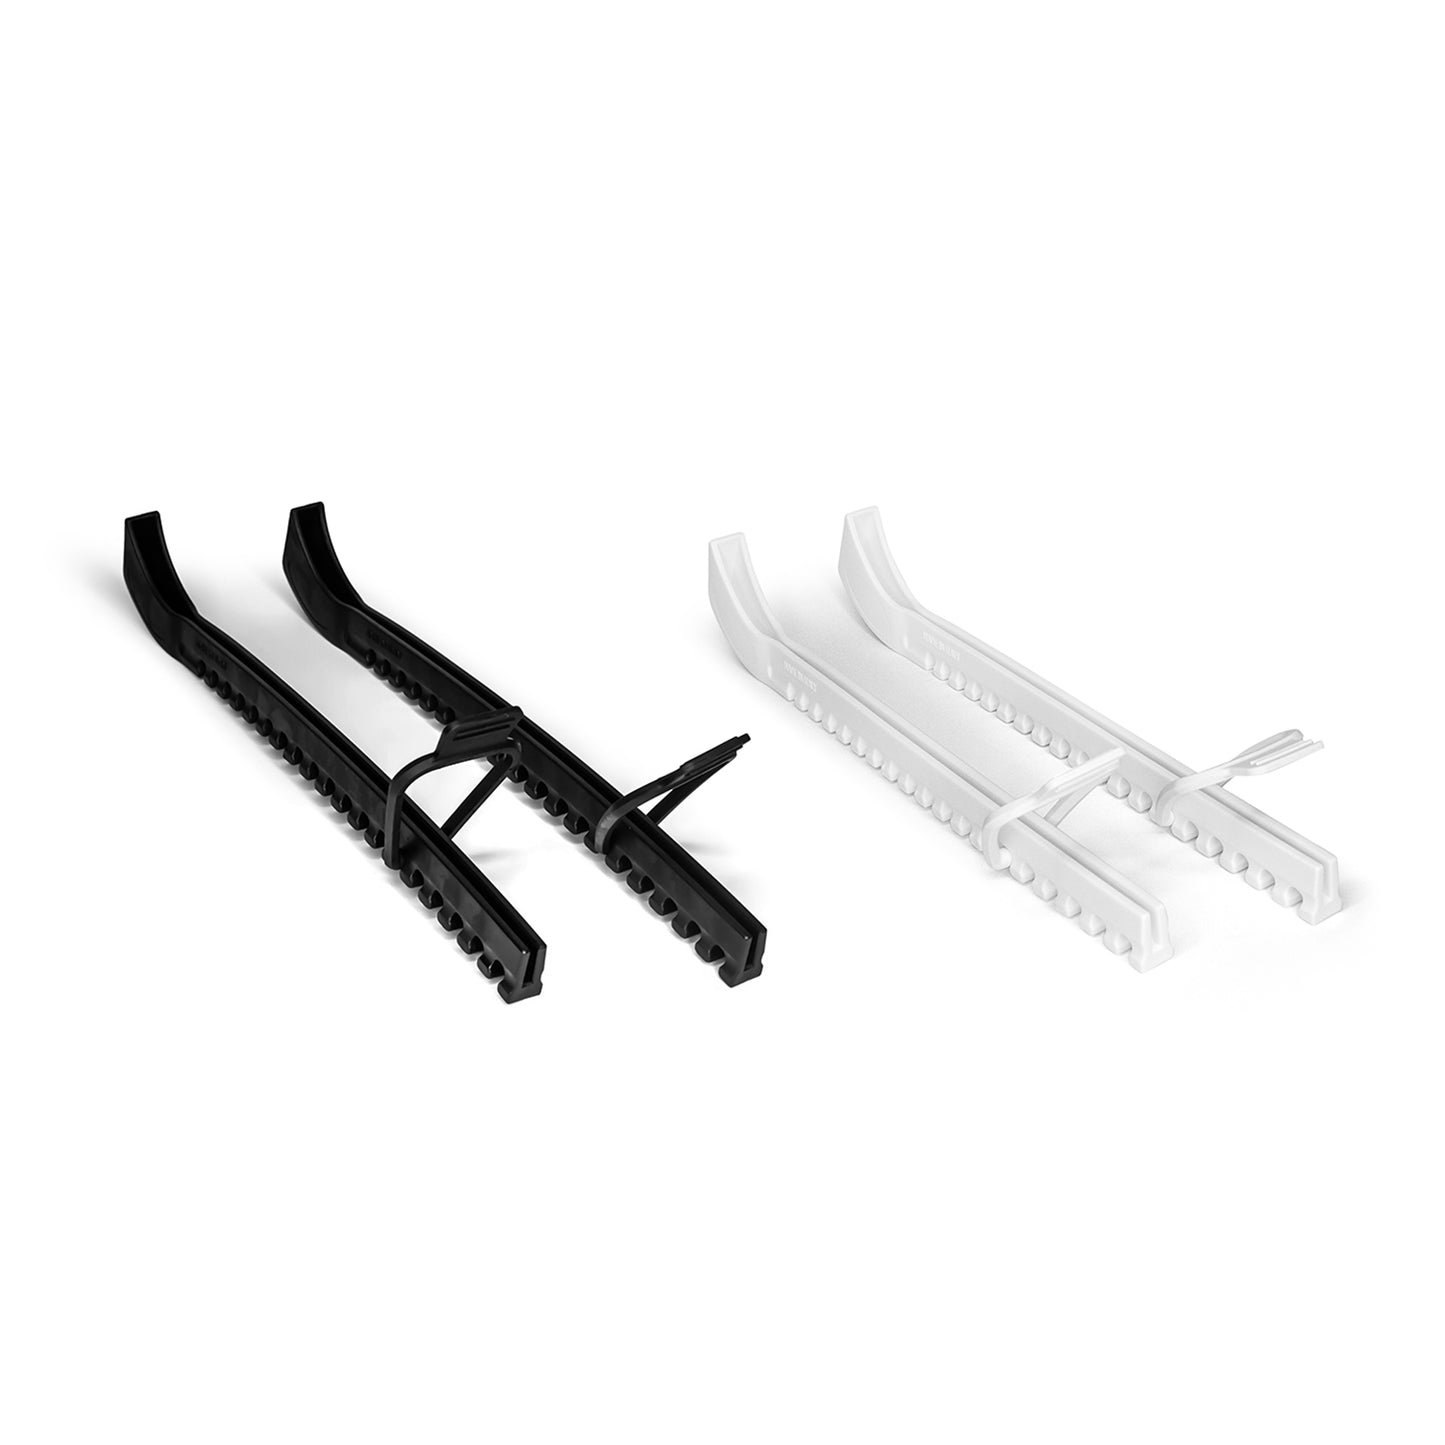 Base ice skate blade protectors for ice sports black/white